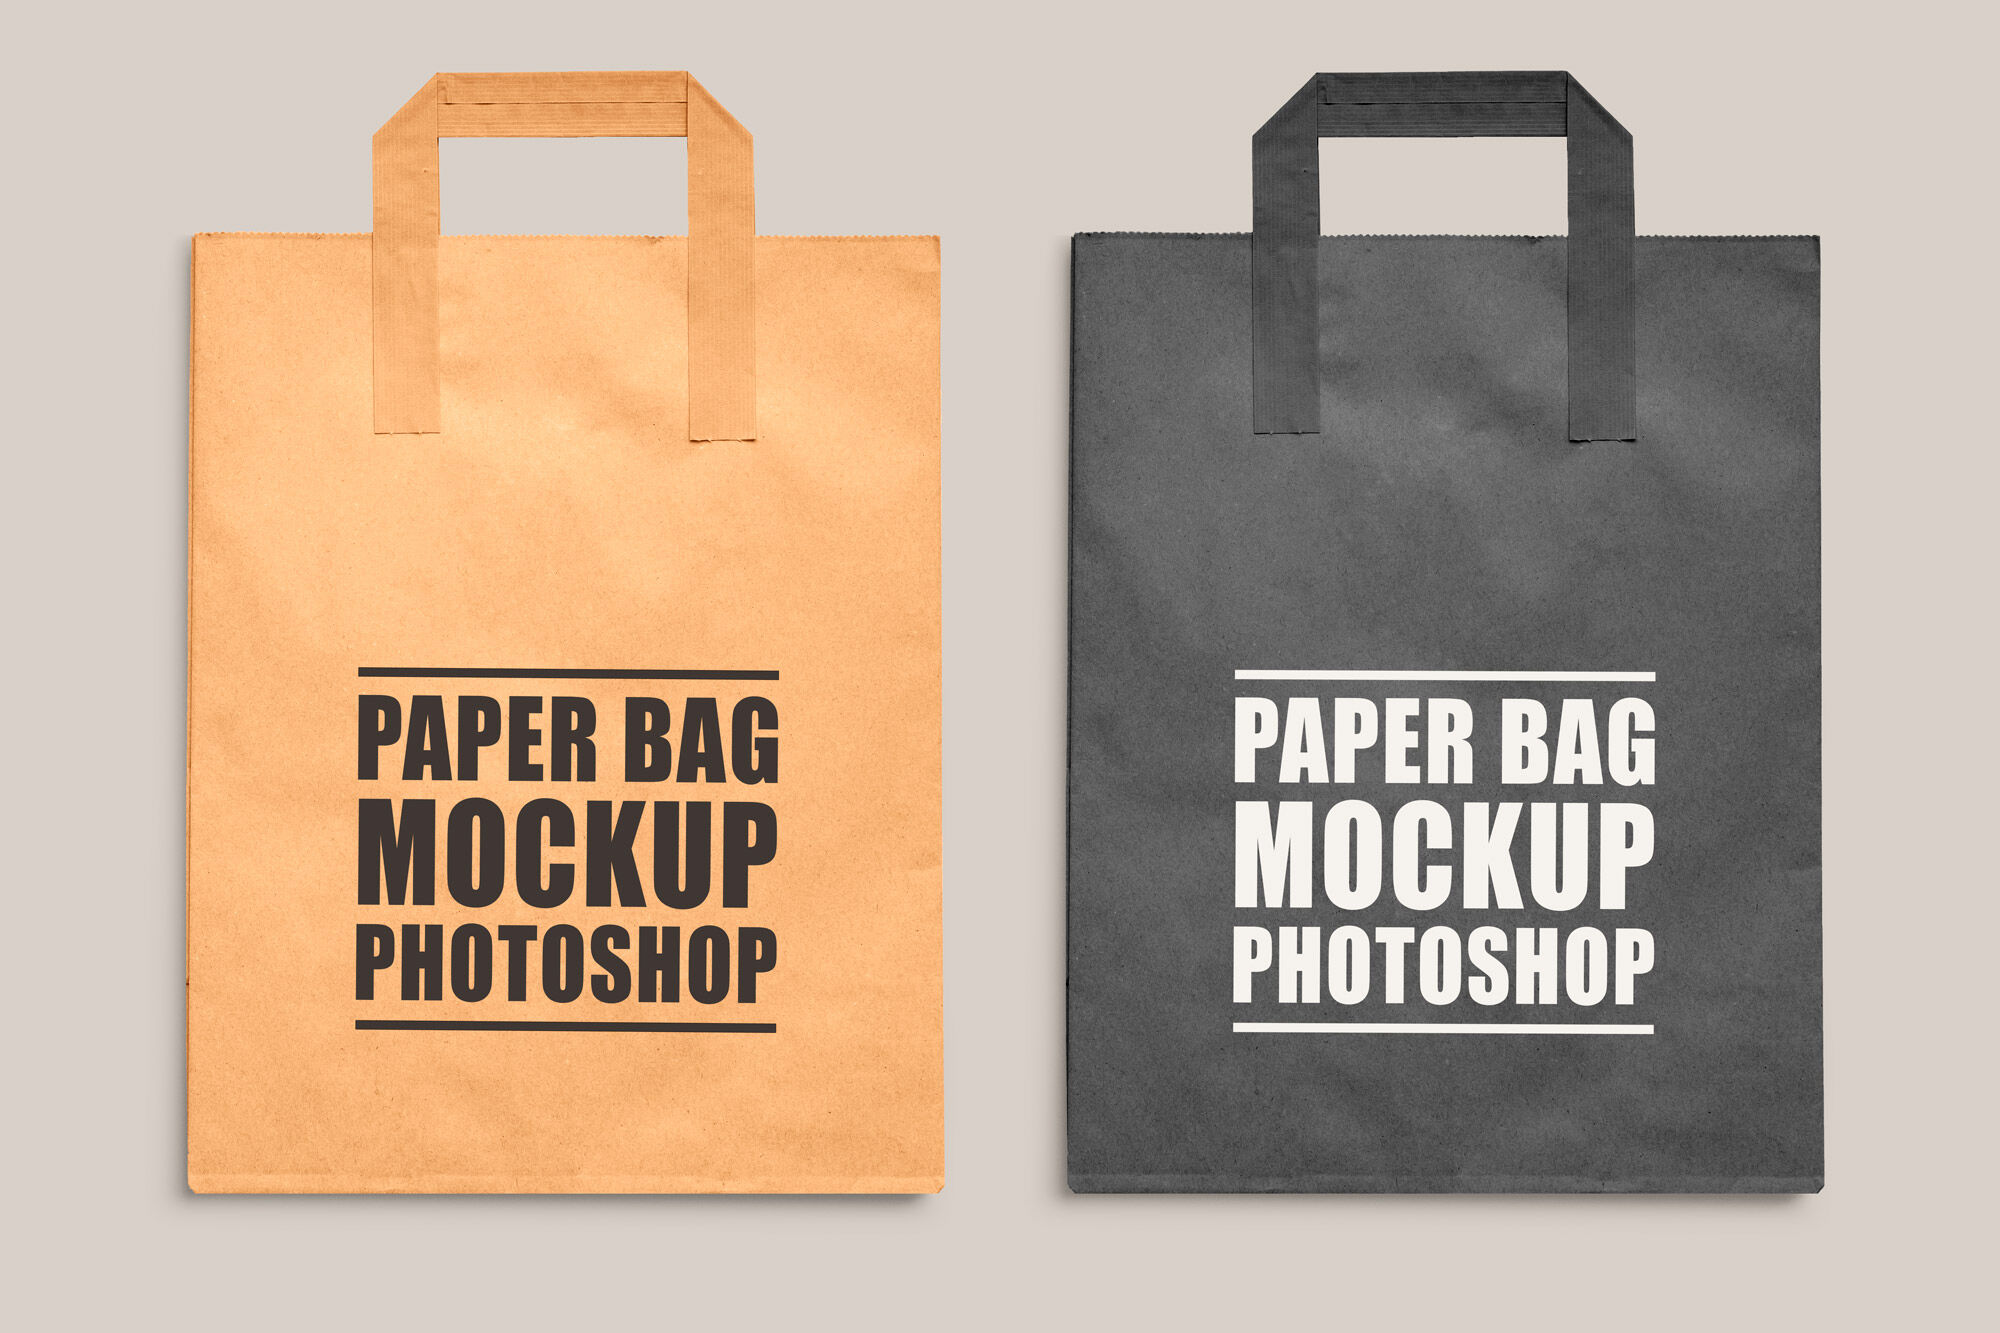 Top View of a Canvas Bag Mockup (FREE) - Resource Boy